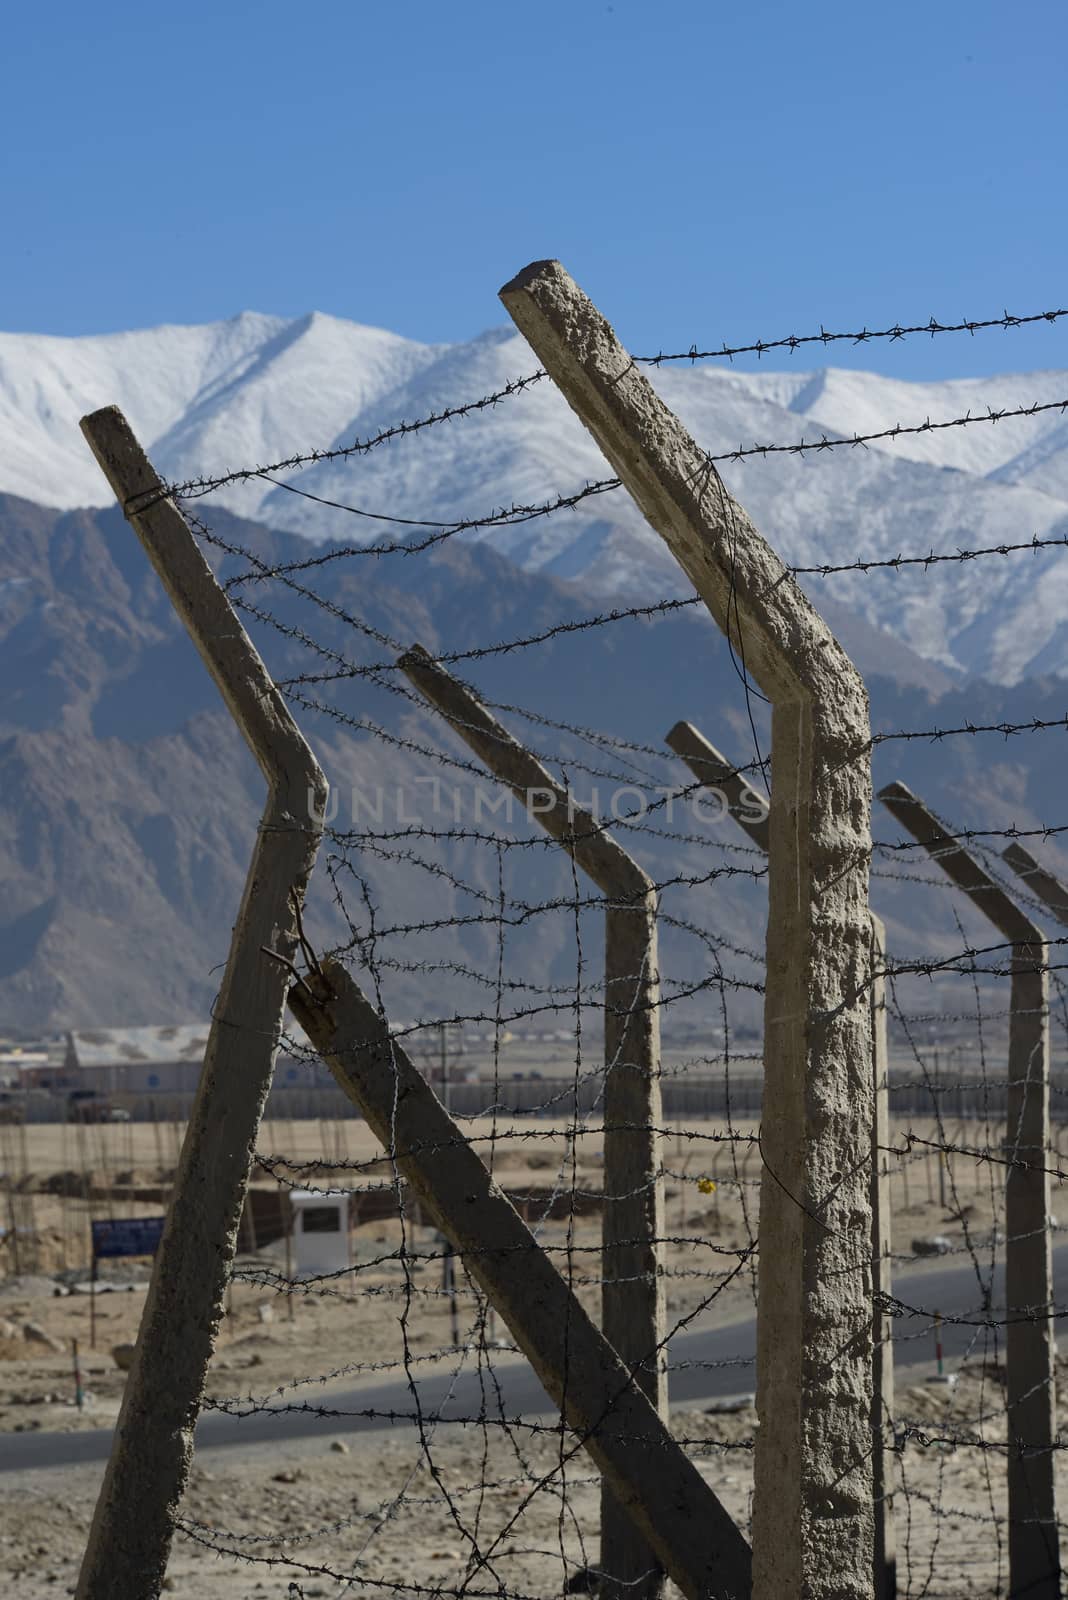 Barbed wire fence in winter with snow mountain background